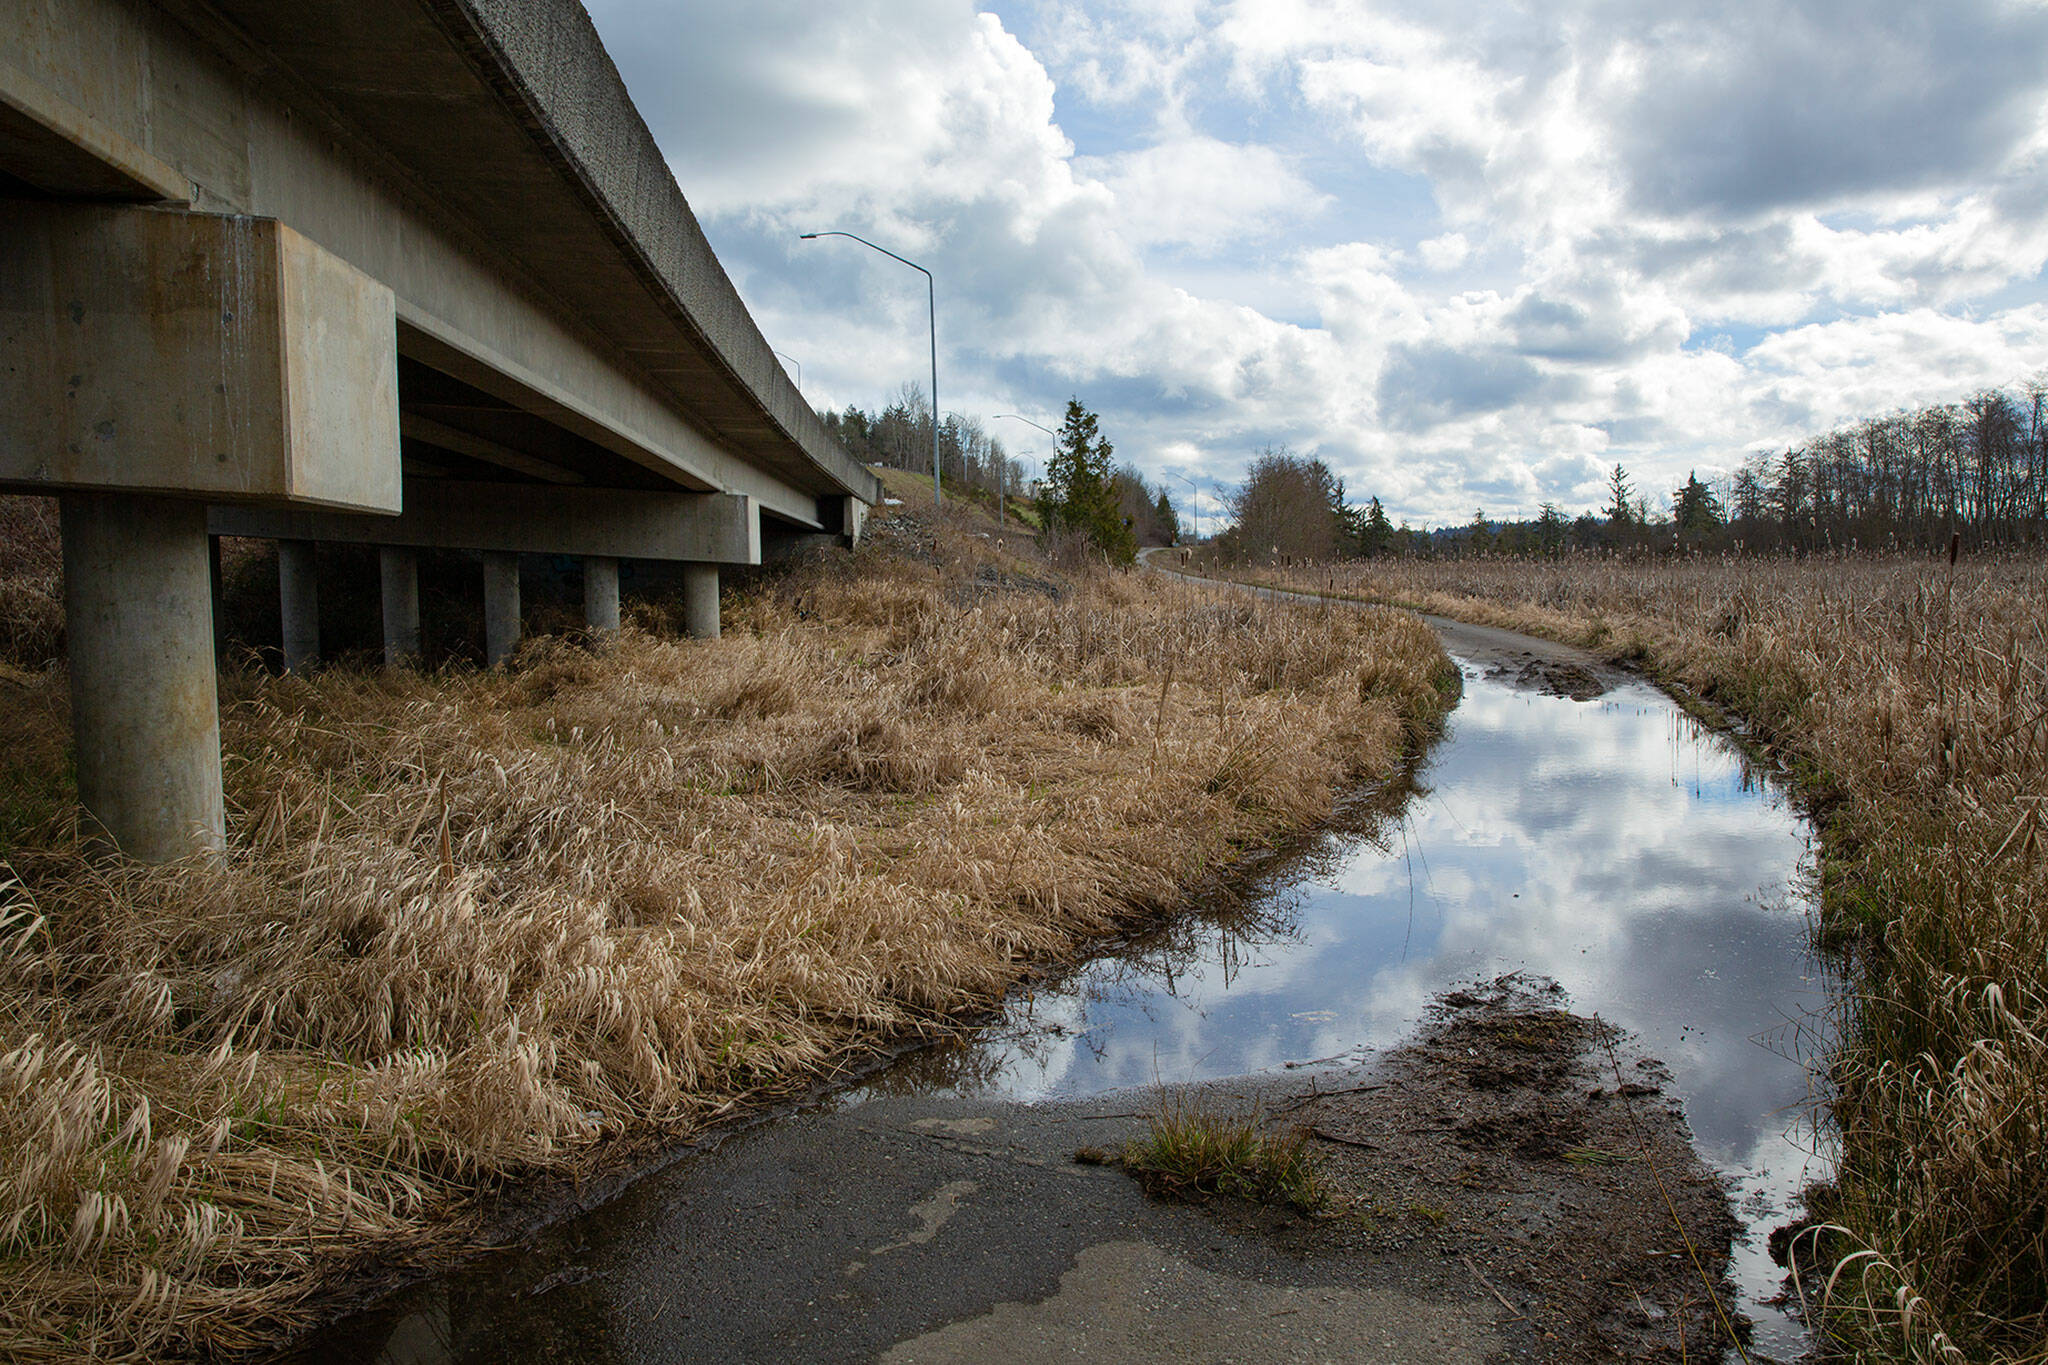 A short path flooded with water March 6 heads under U.S. 2 and guides bicyclists eastbound onto the highway’s unprotected shoulder near the junction with Highway 204 in Lake Stevens. A sign guides cyclists down this spur to keep them from having to cross highway traffic before merging onto the shoulder. (Ryan Berry / The Herald)